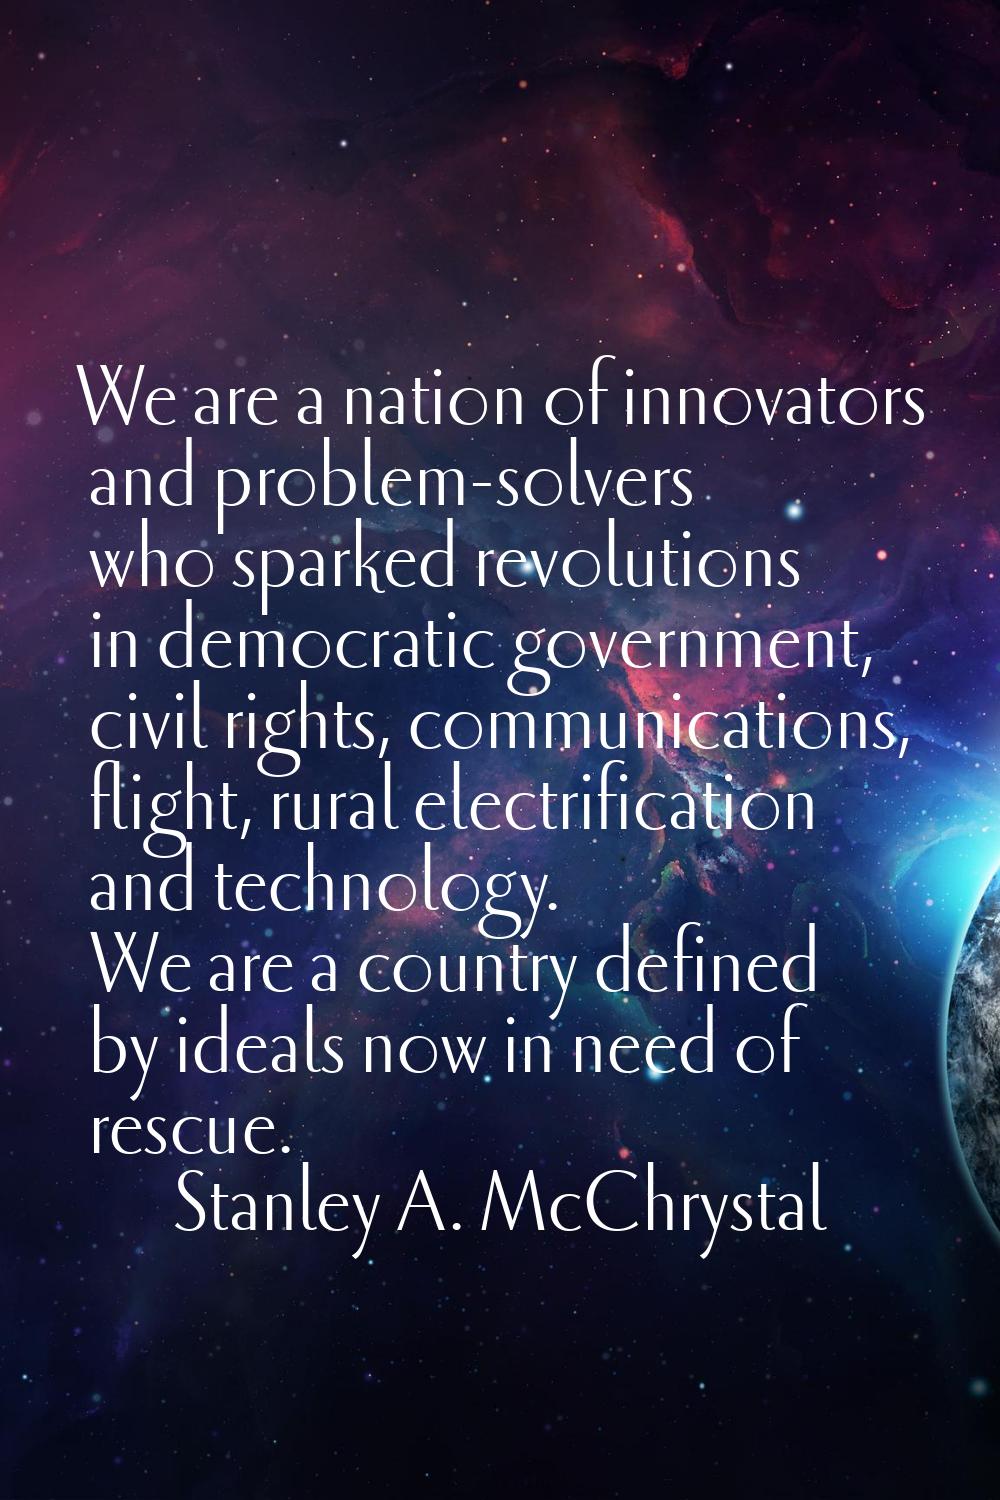 We are a nation of innovators and problem-solvers who sparked revolutions in democratic government,